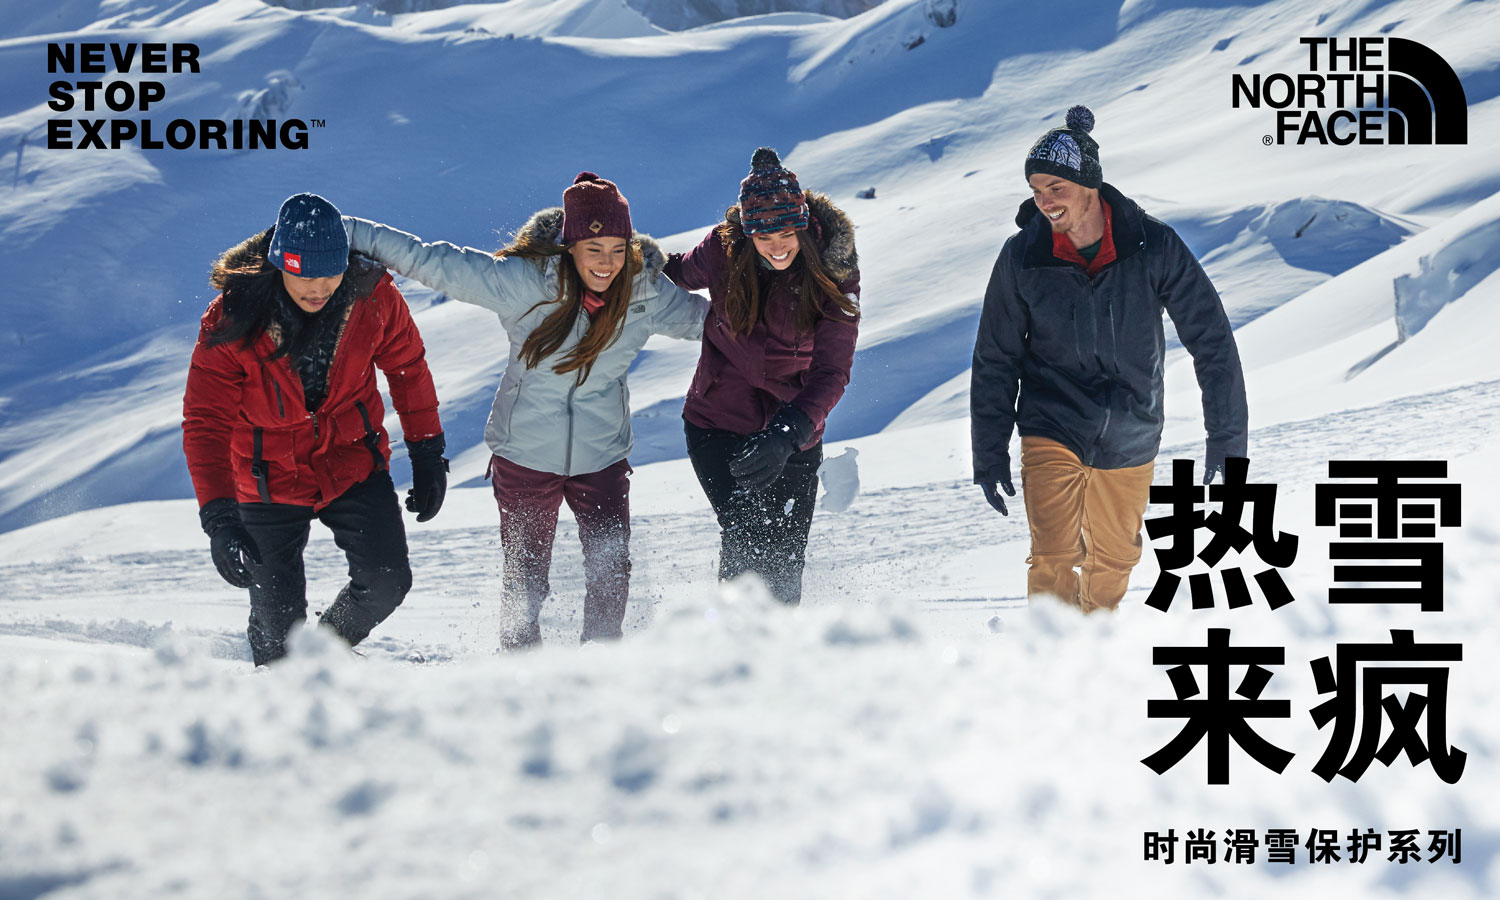 The North Face 发布全新冬季 “热雪来疯” 系列